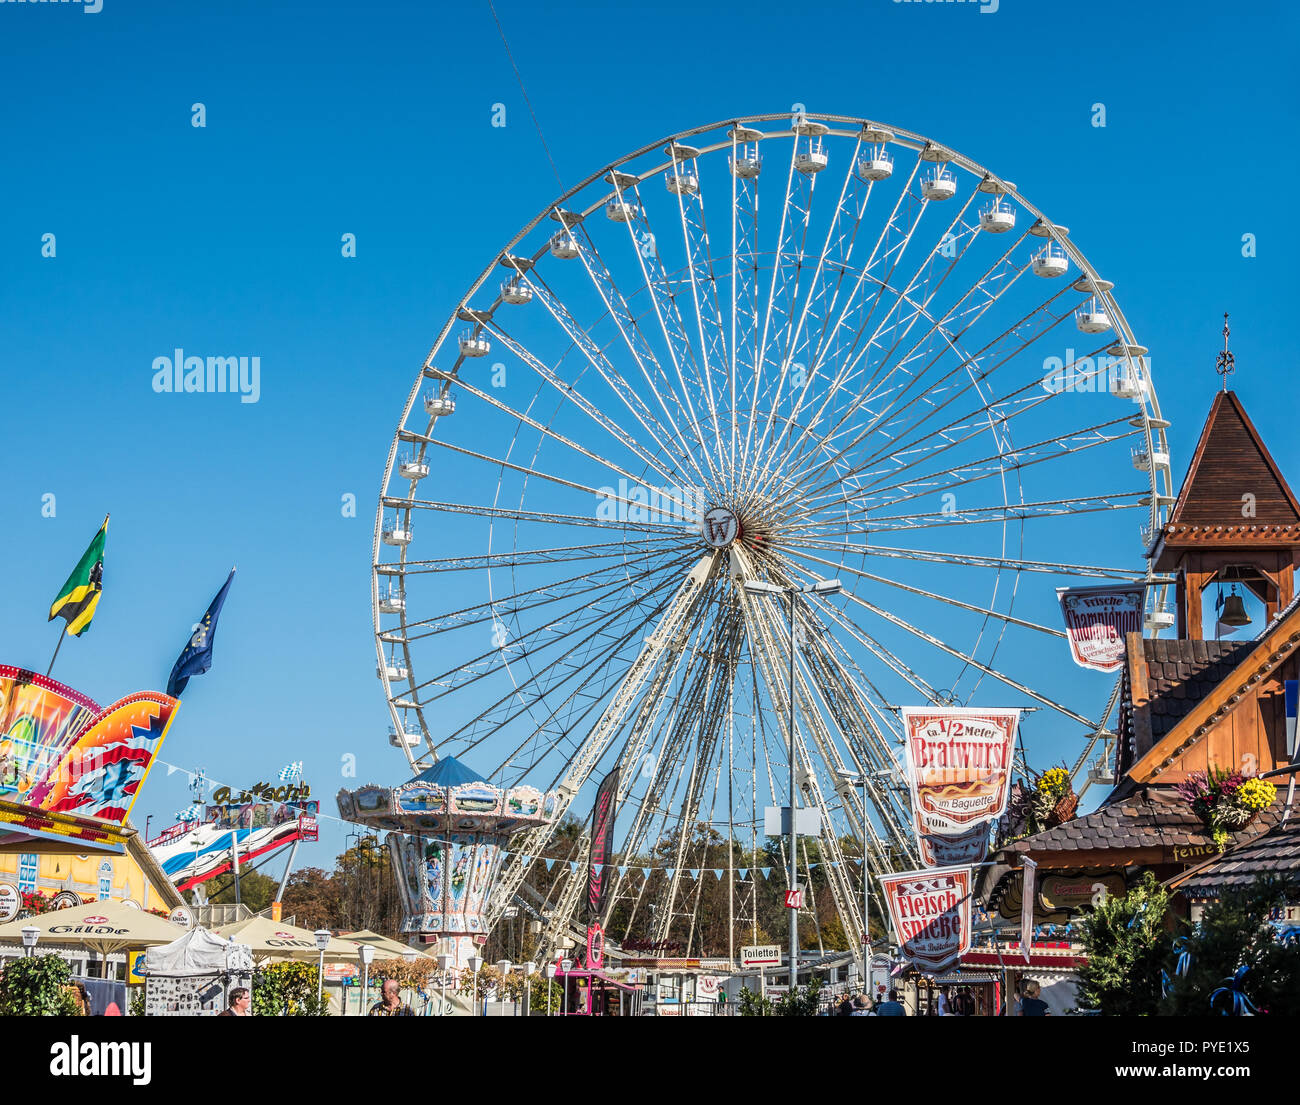 Honnover, Lower Saxony, Germany, October 13., 2018: View of the Ferris wheel at the Oktoberfest with various stalls and games stalls in the foreground Stock Photo